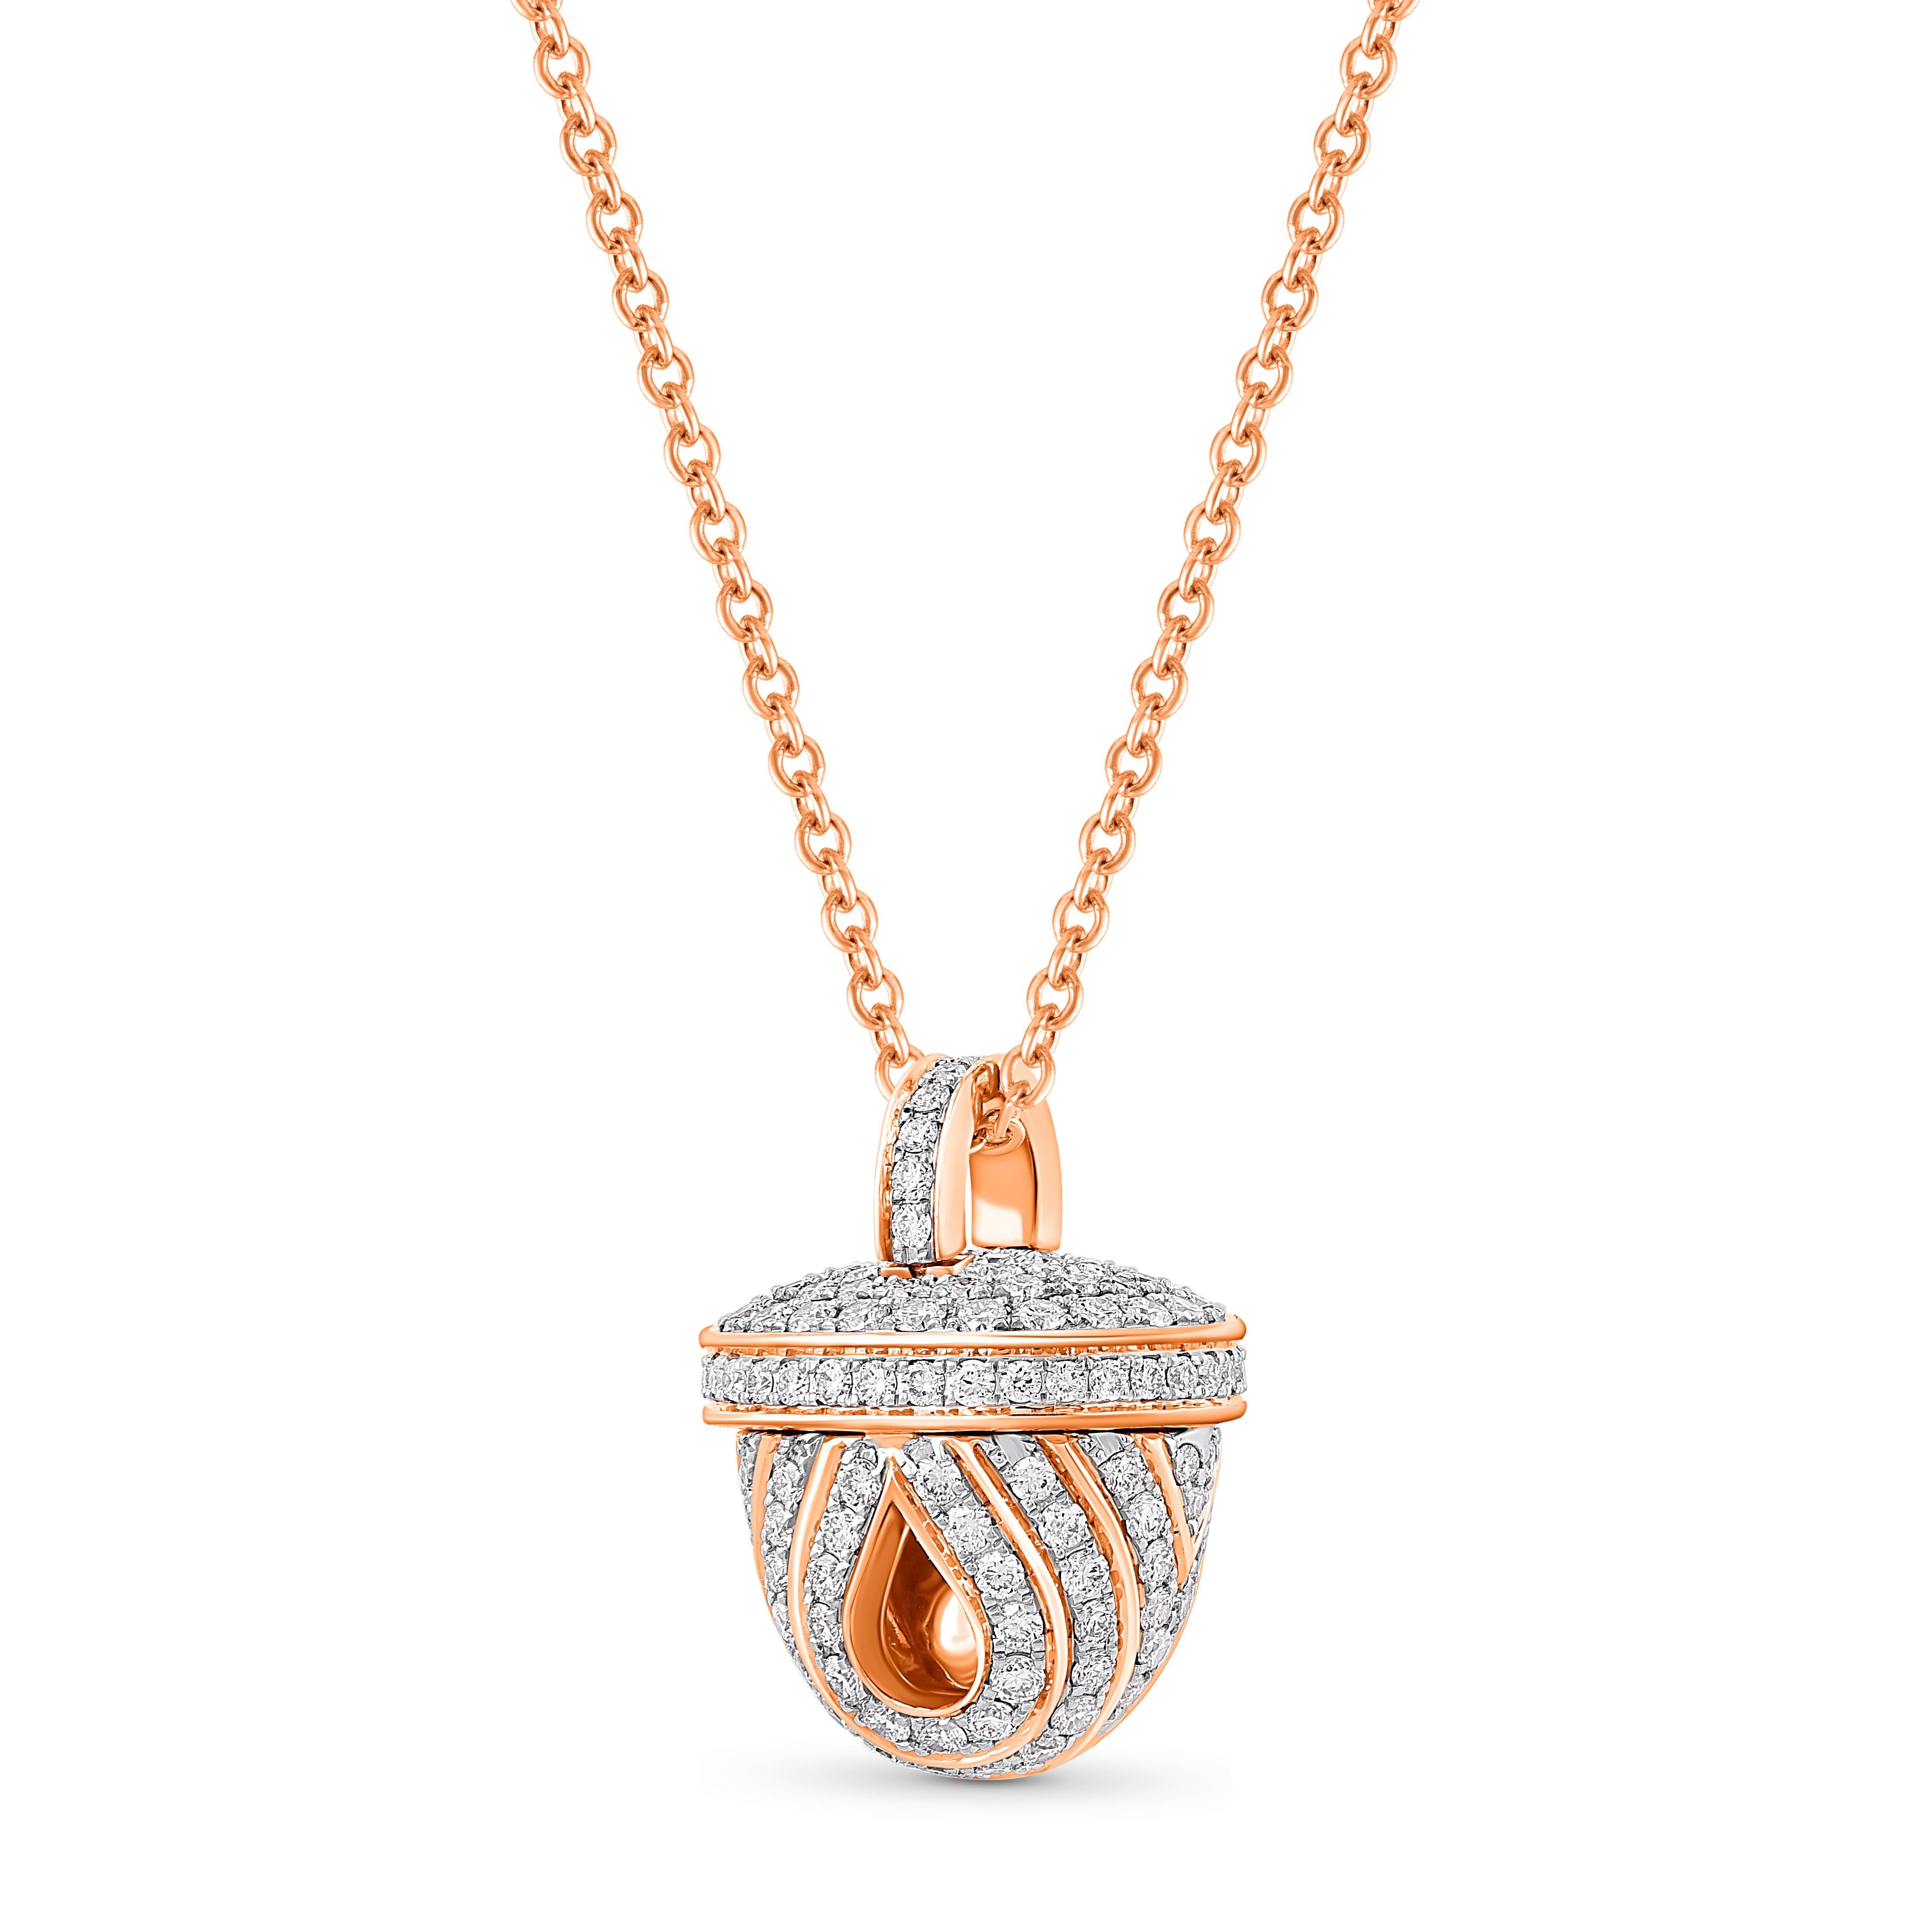 Inspired by the soulful melody of the Ghunghroo, a musical anklet integral to classical dances, this stunning pendant necklace is studded with brilliant cut natural diamonds.

The diamonds are graded as F color and VS2 clarity. The total diamond